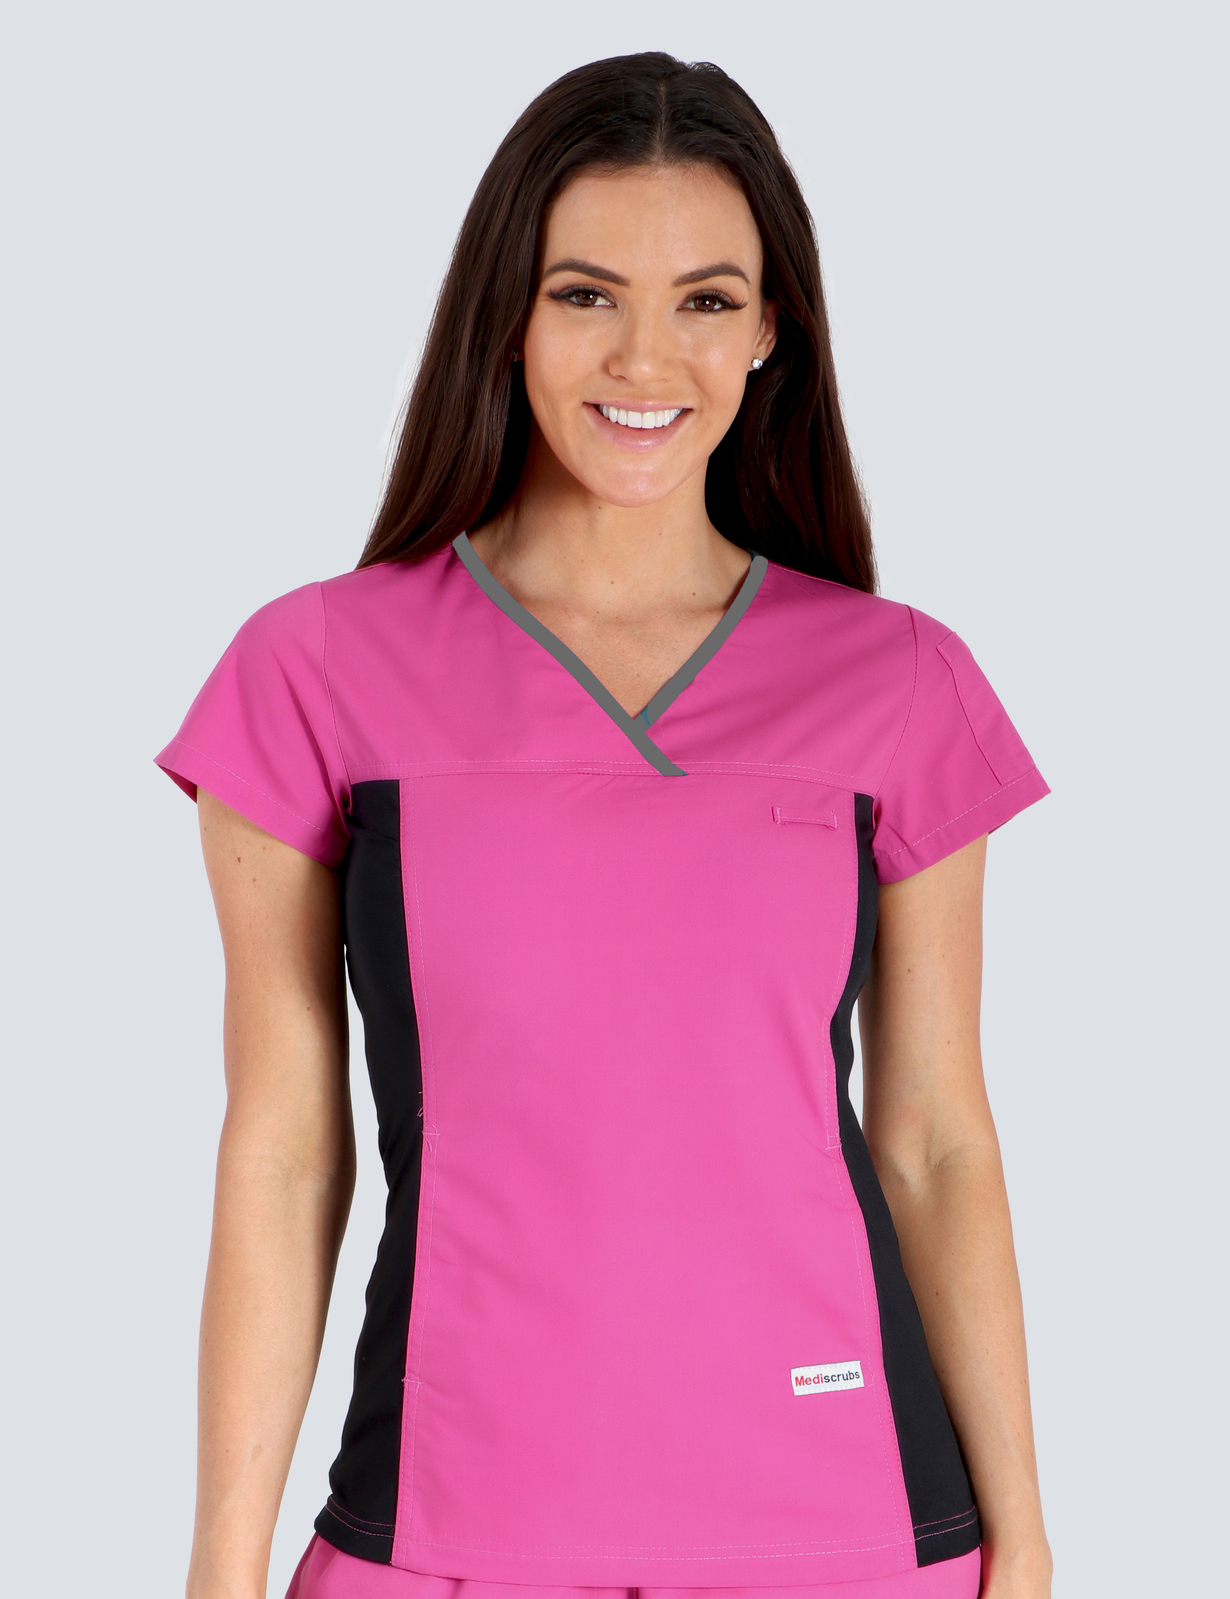 Ipswich Hospital - SCN (Women's Fit Spandex Scrub Top in Pink with Grey Trim incl Logos)